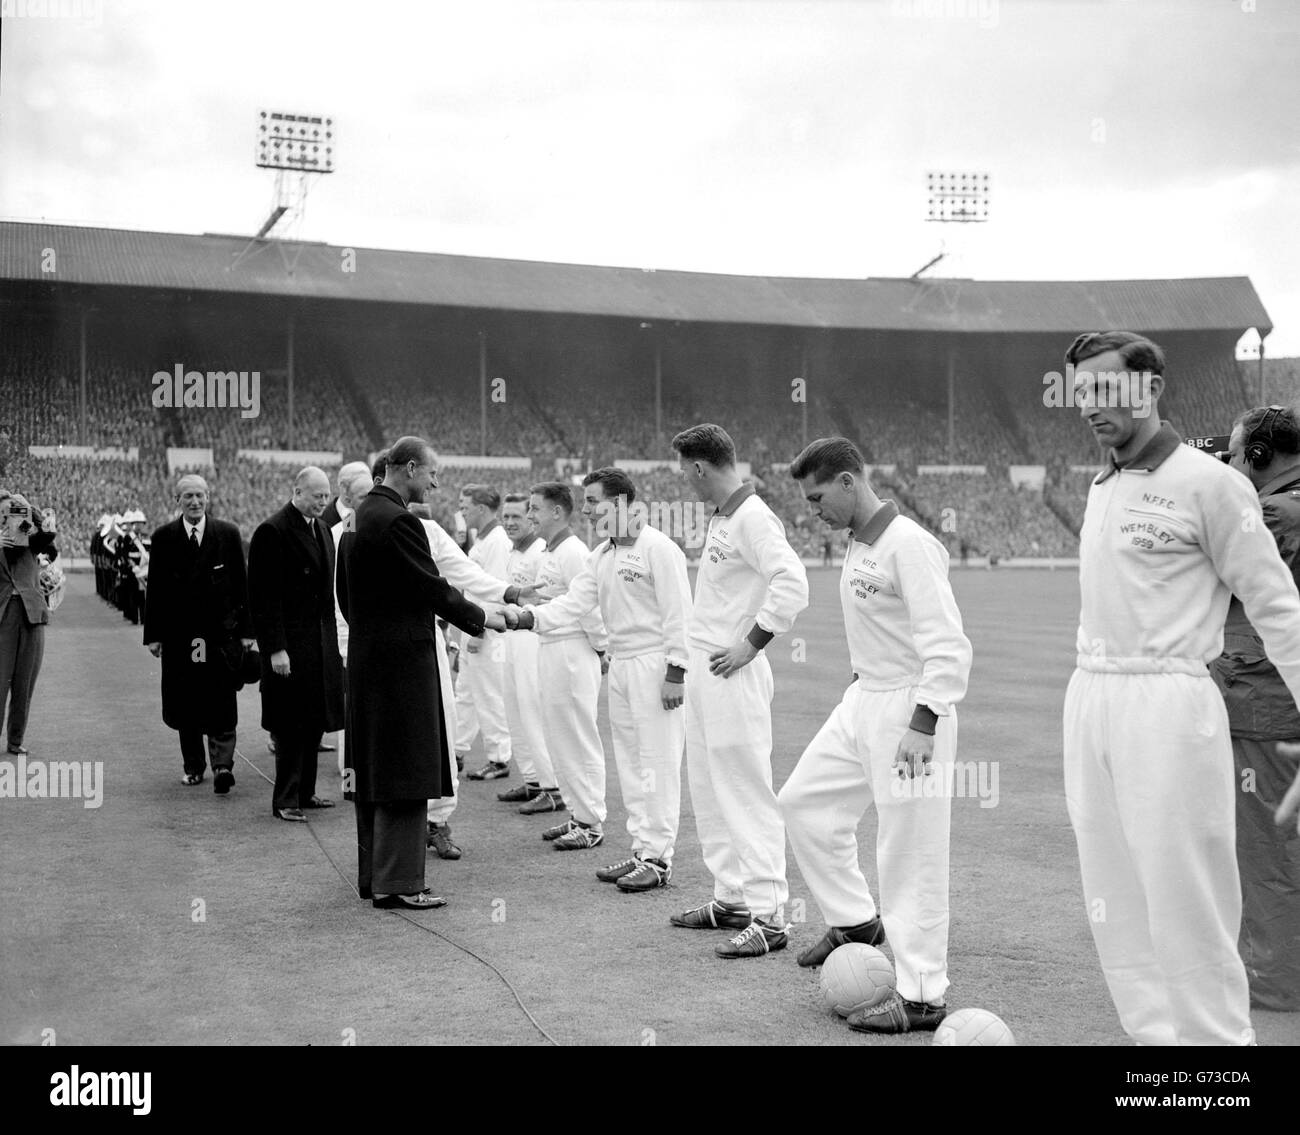 The Duke of Edinburgh meets members of the Nottingham Forest team before the kick-off in the FA Cup Final against Luton Town at Wembley. Forest won the cup with a 2-1 victory. Stock Photo